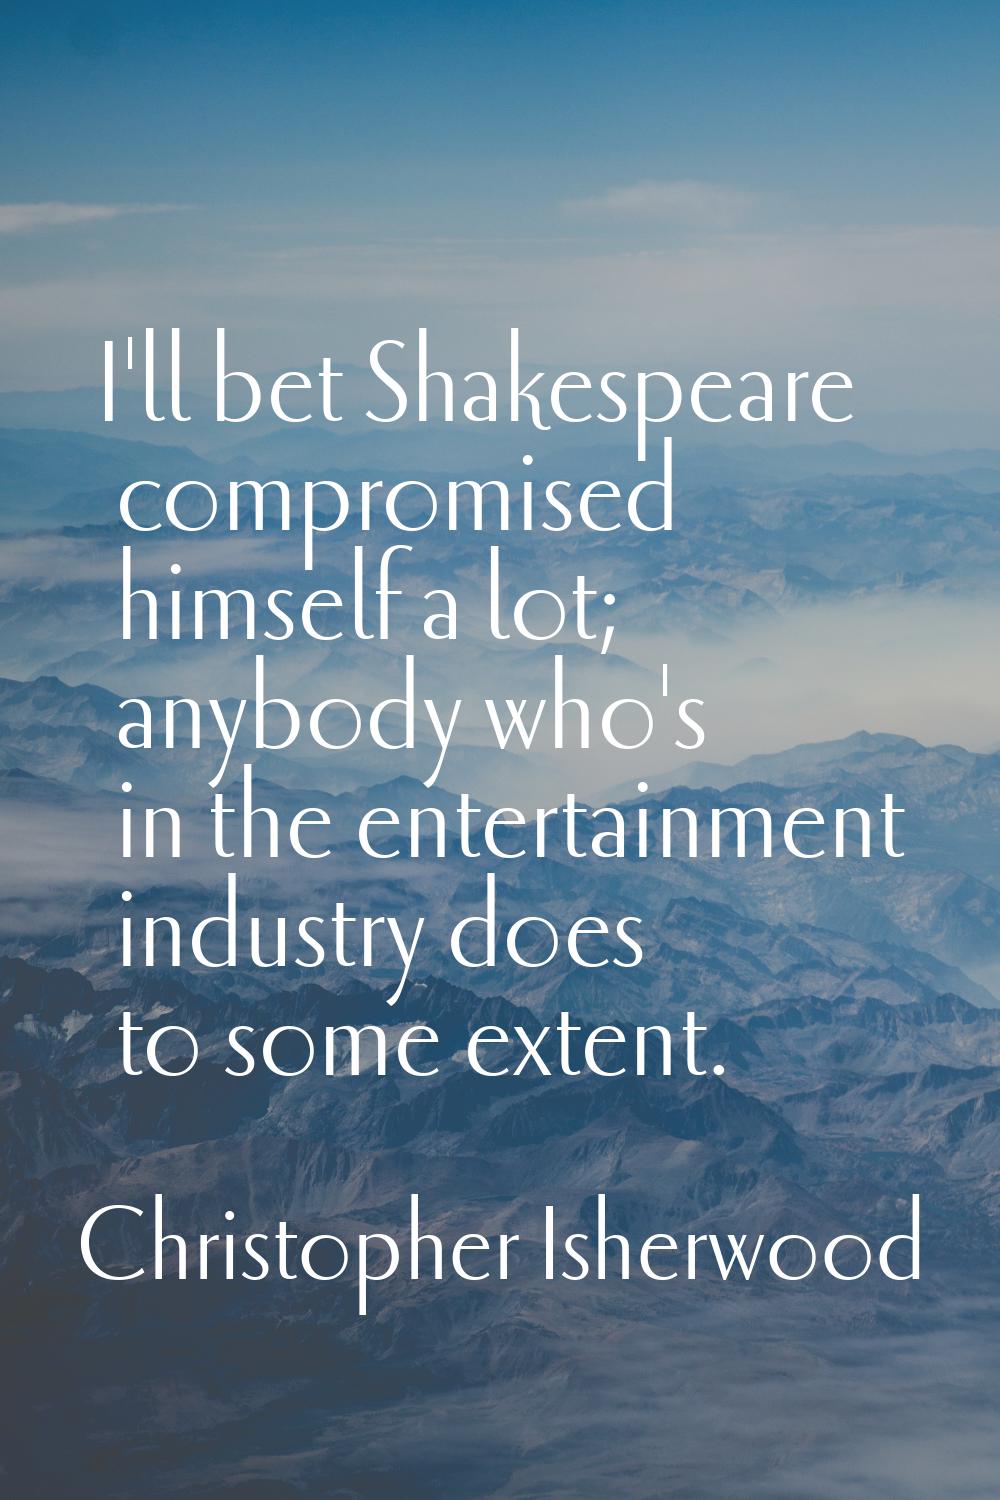 I'll bet Shakespeare compromised himself a lot; anybody who's in the entertainment industry does to